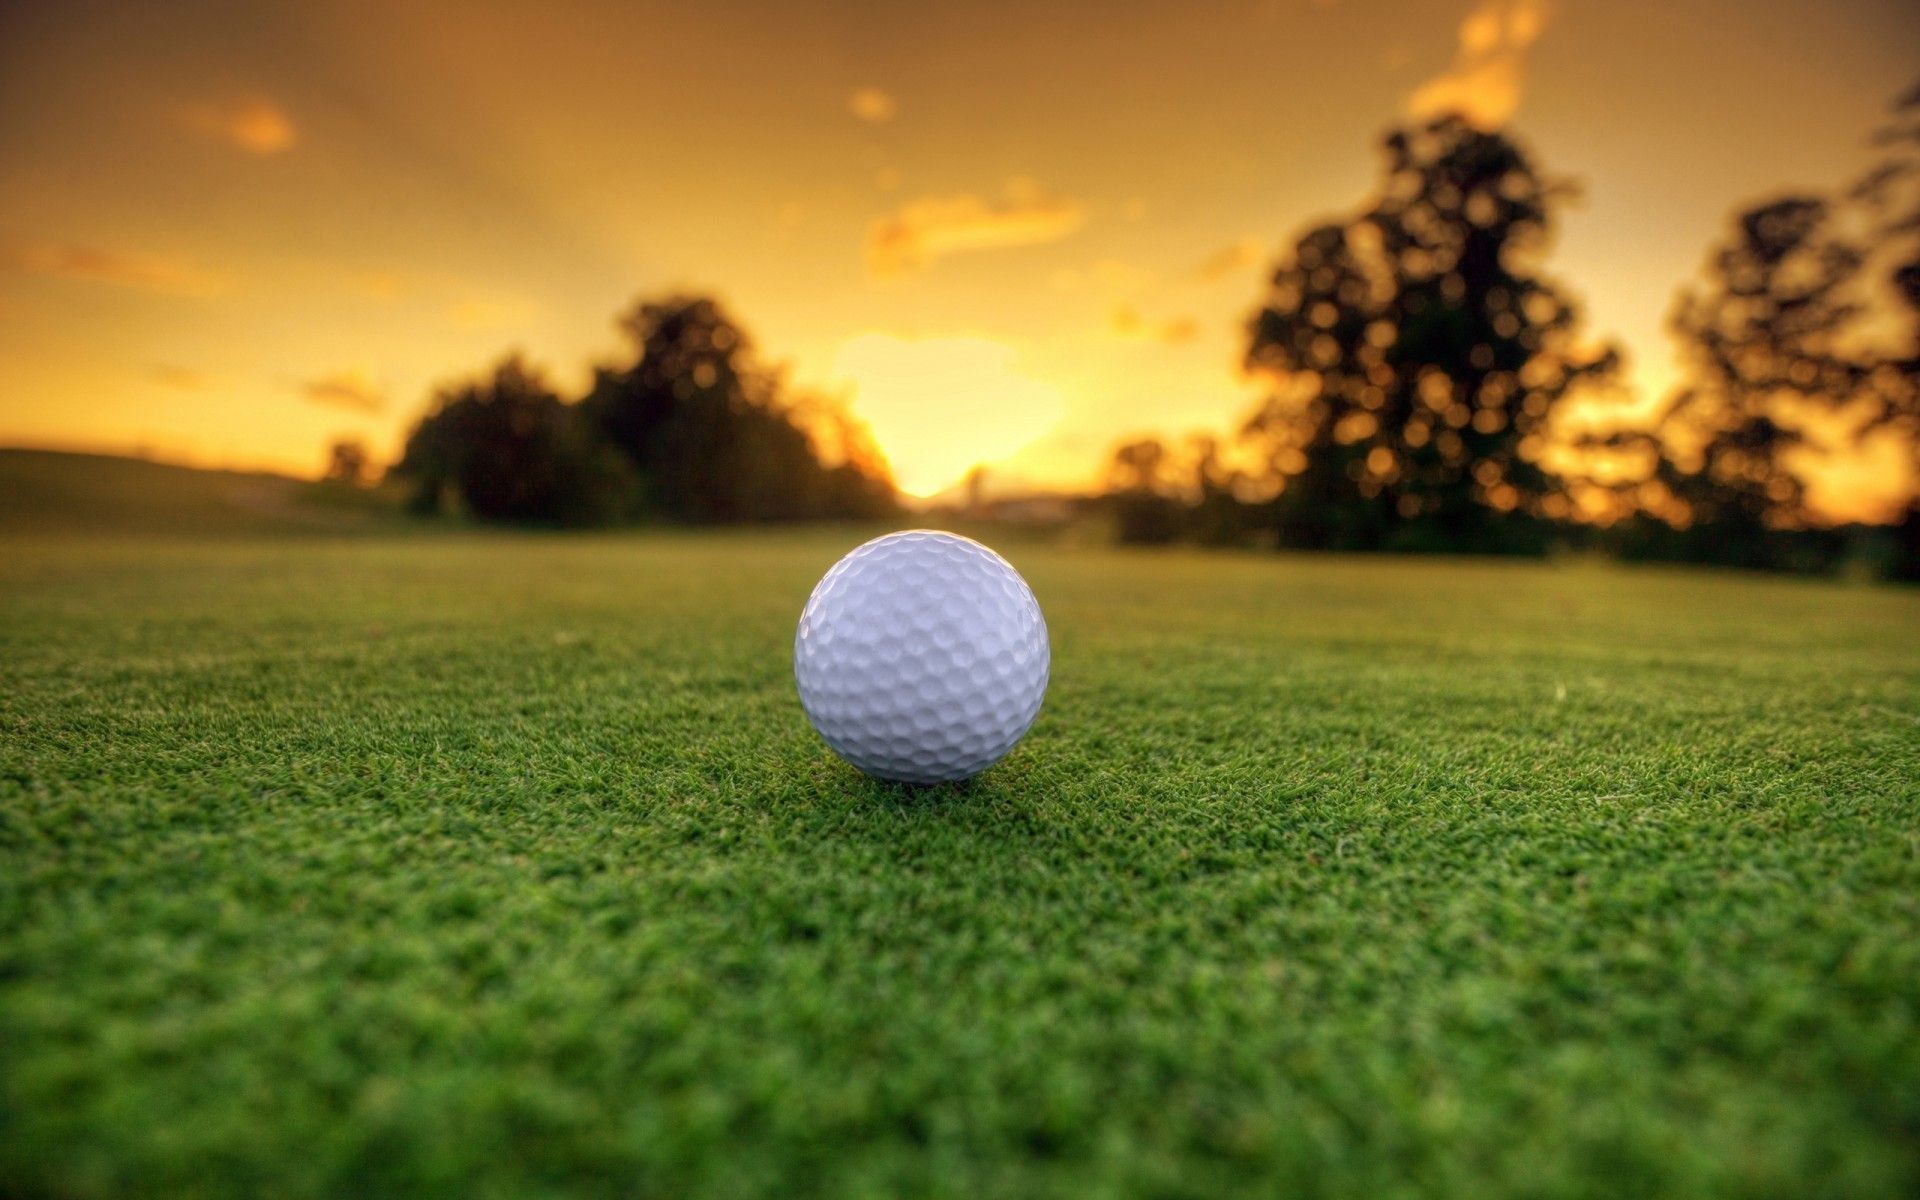 1920x1200 best images about golf on Pinterest Play golf Golf art and | Wallpapers 4k  | Pinterest | Golf, Golf art and Wallpaper